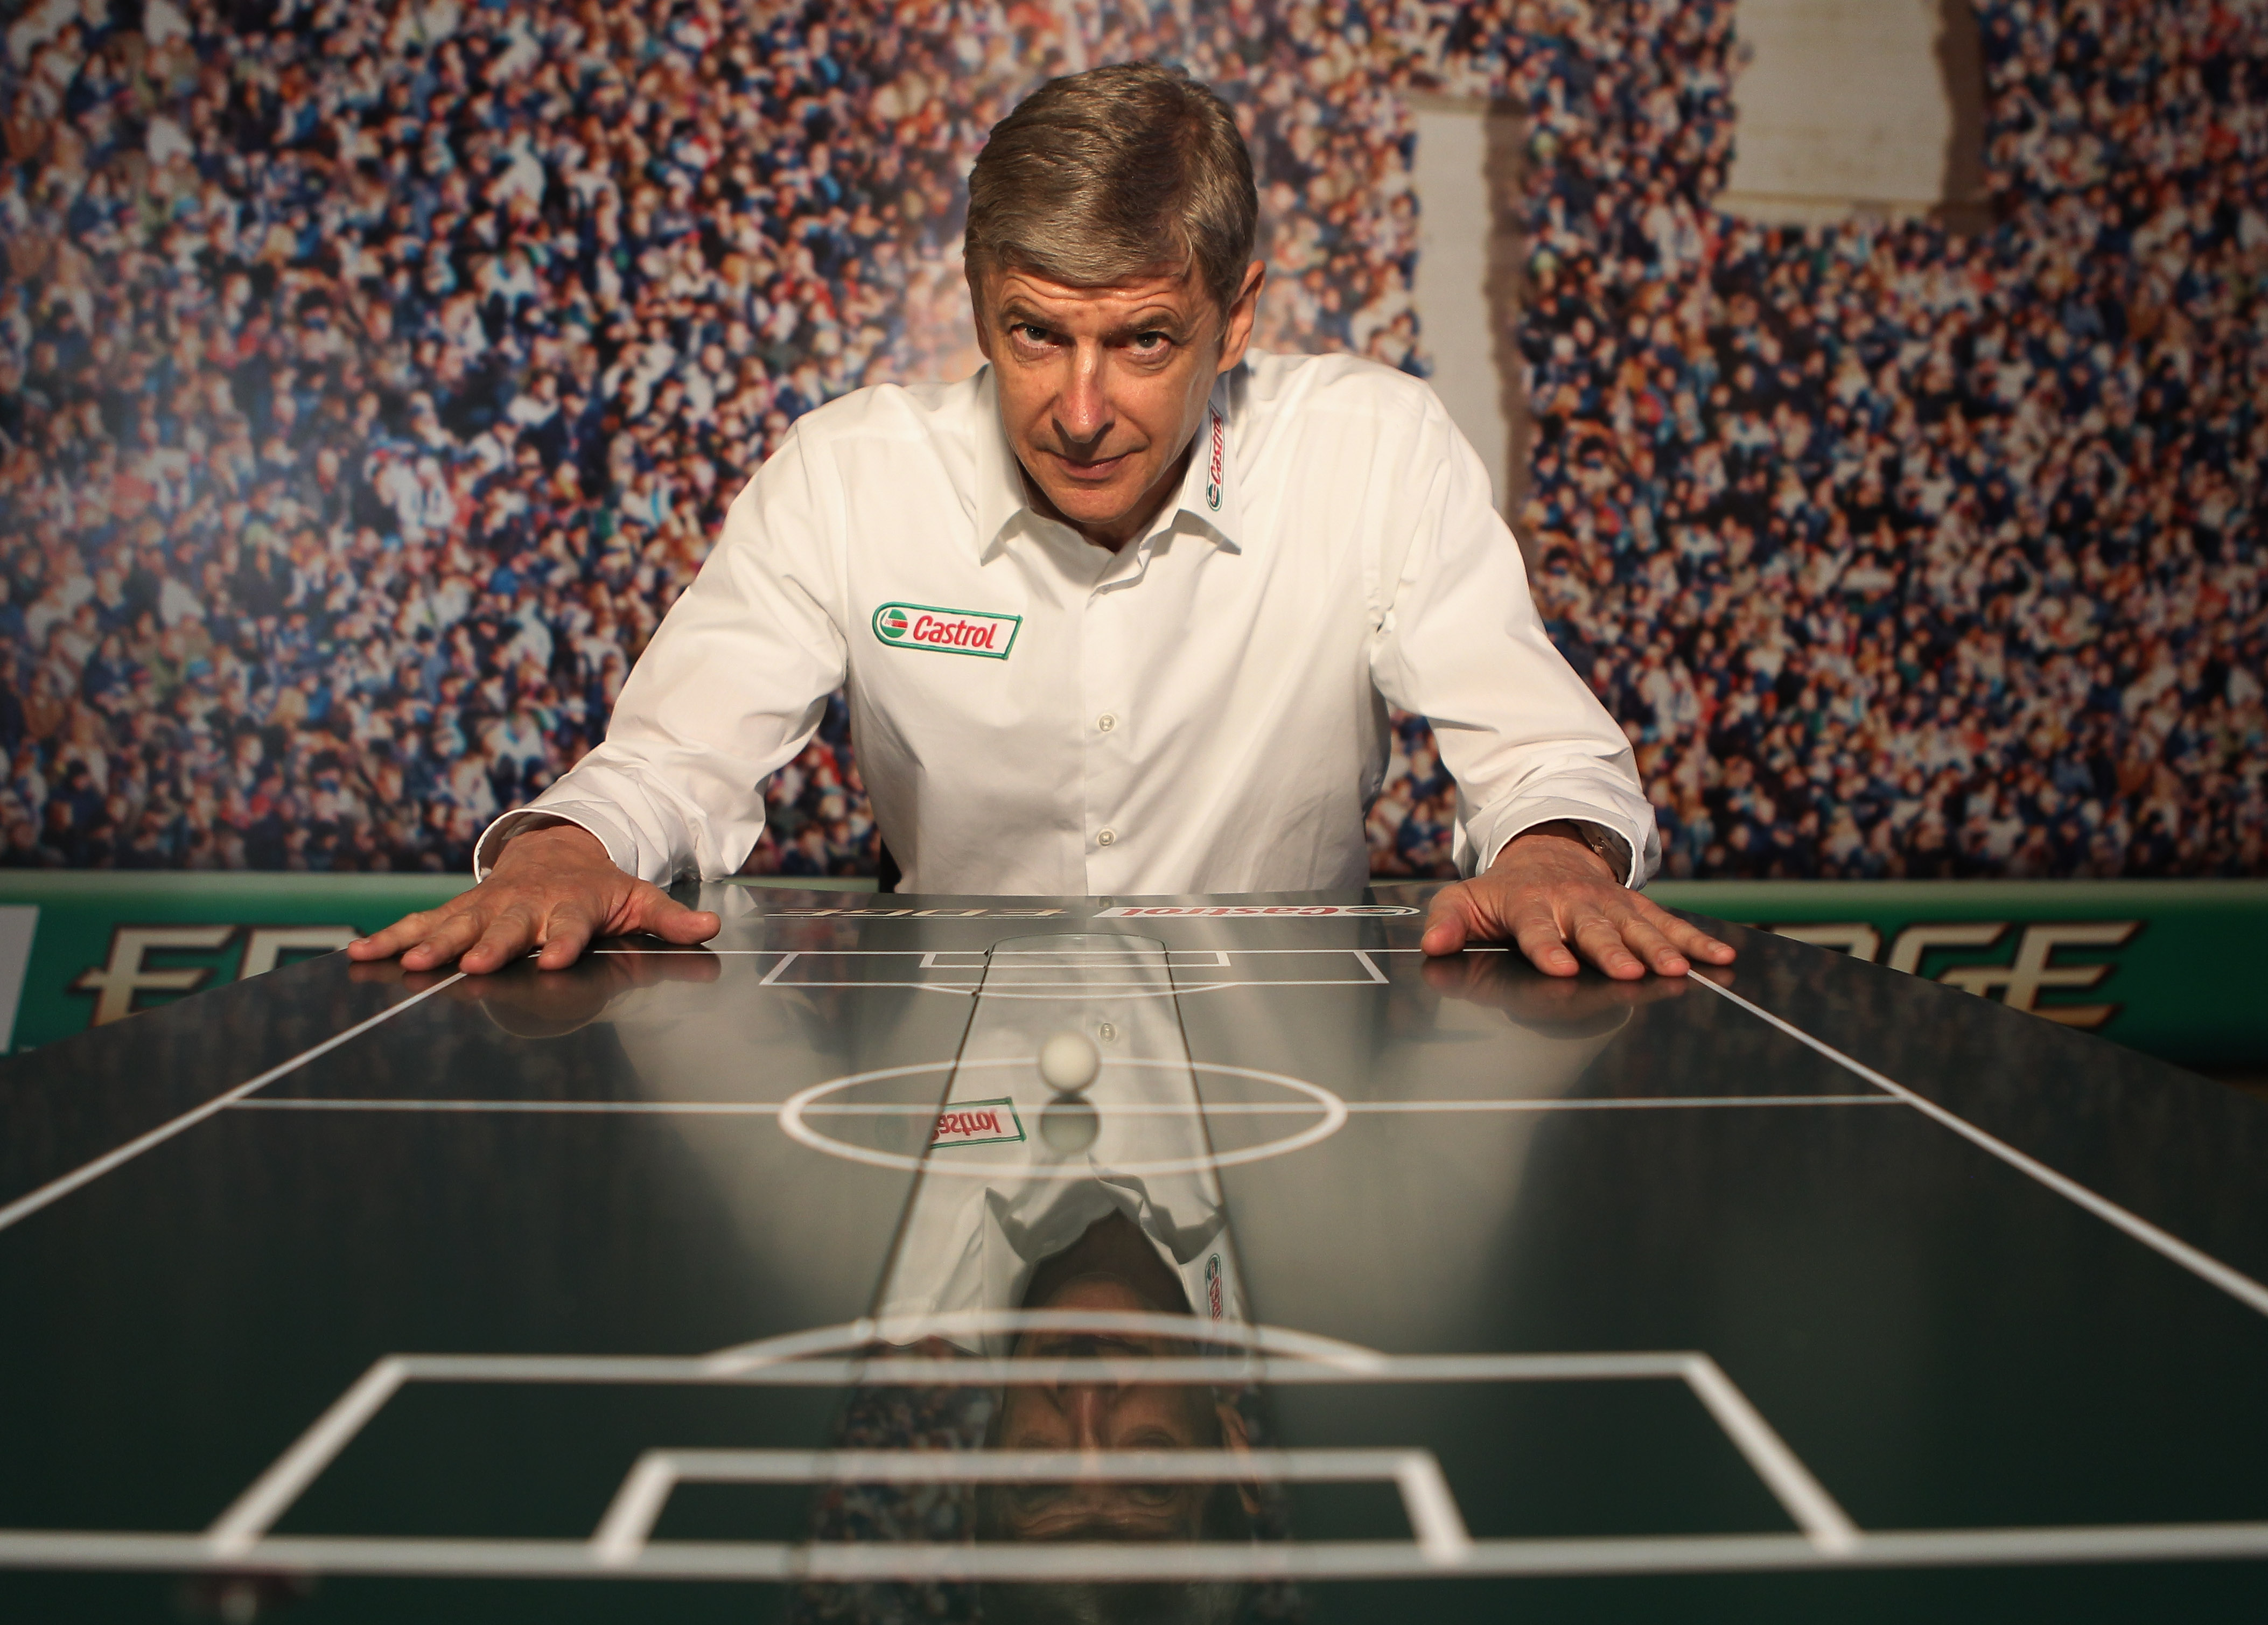 JOHANNESBURG, SOUTH AFRICA - JUNE 09:  Arsene Wenger poses at the Castrol Performance Lab in Johannesburg on June 9, 2010 in Johannesburg, South Africa. Wenger gave an exclusive preview of the unique performance analysis tools that Castrol, official spons